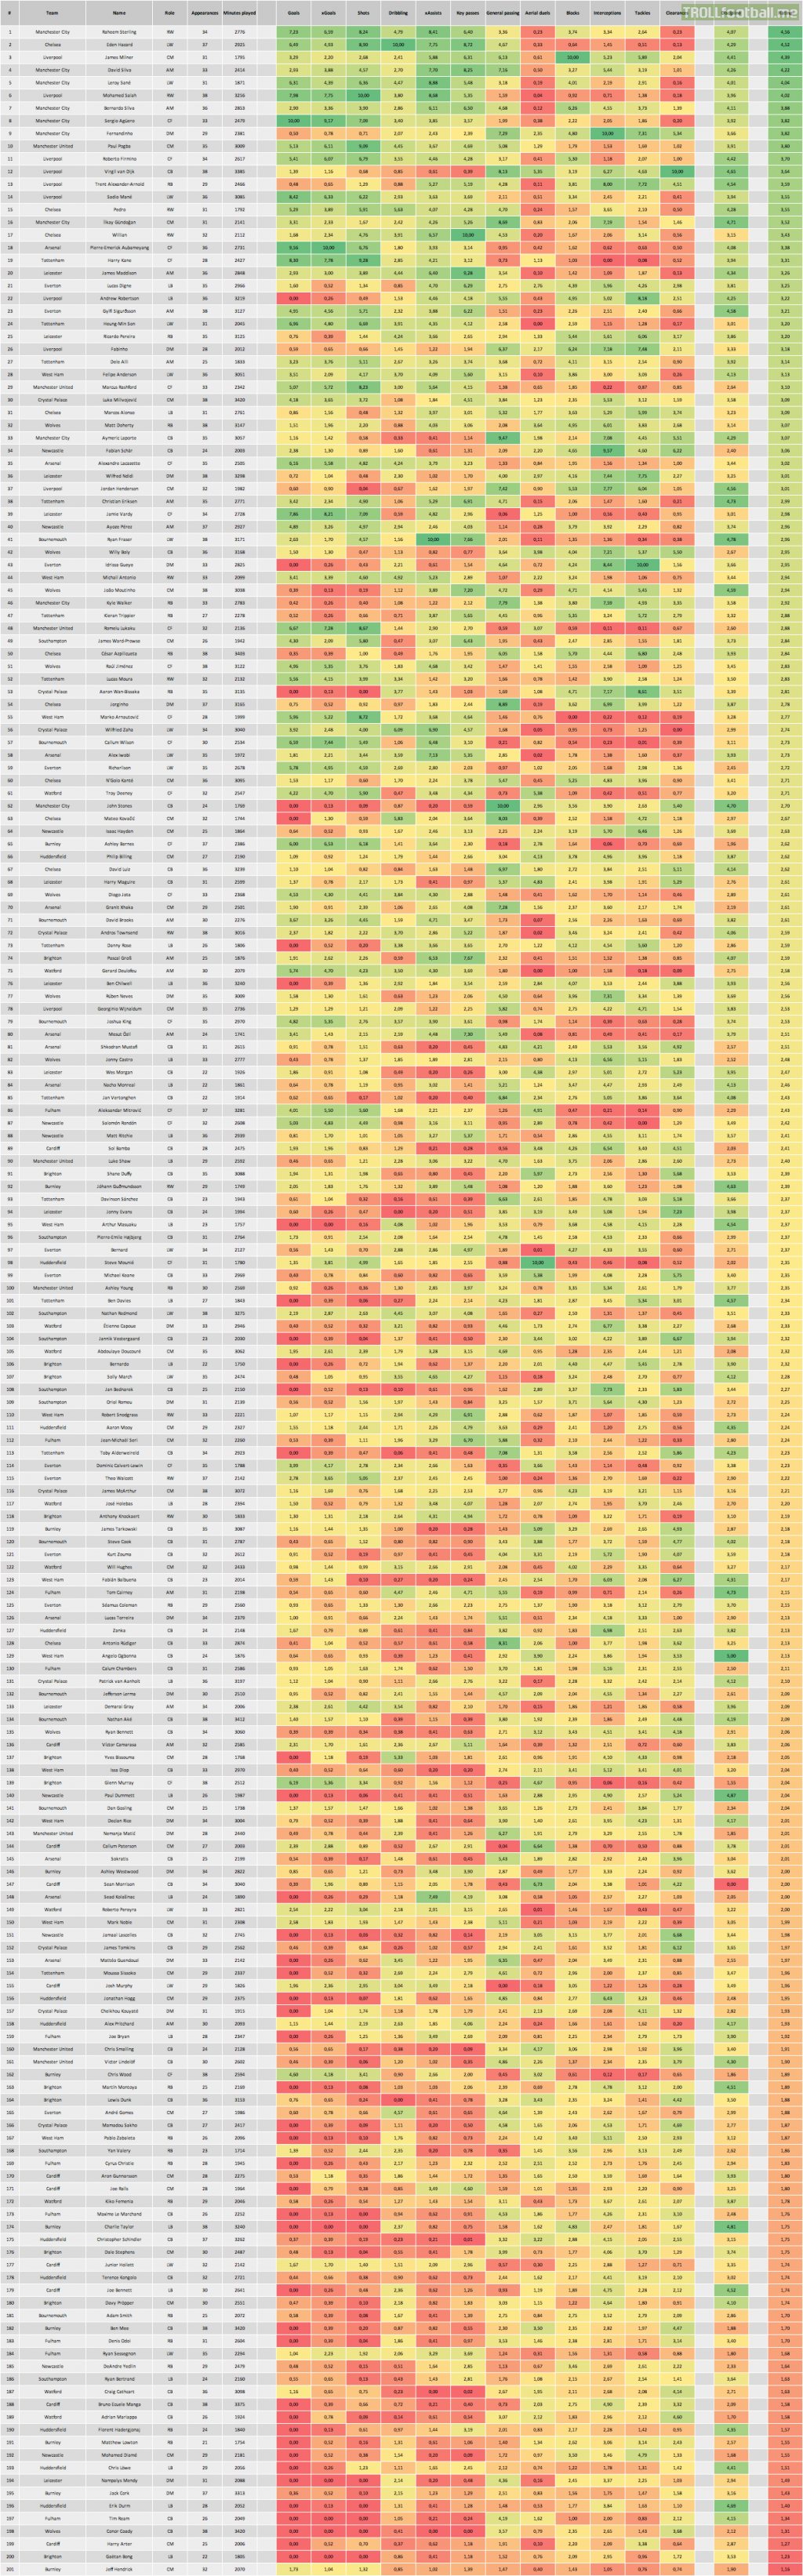 [OC] Visualized data of the 100 most statistically impressive players in the top five leagues 18/19 (normalized using feature scaling around minutes played, goals+xgoals conceded per minute, as well as average opponent ELO)